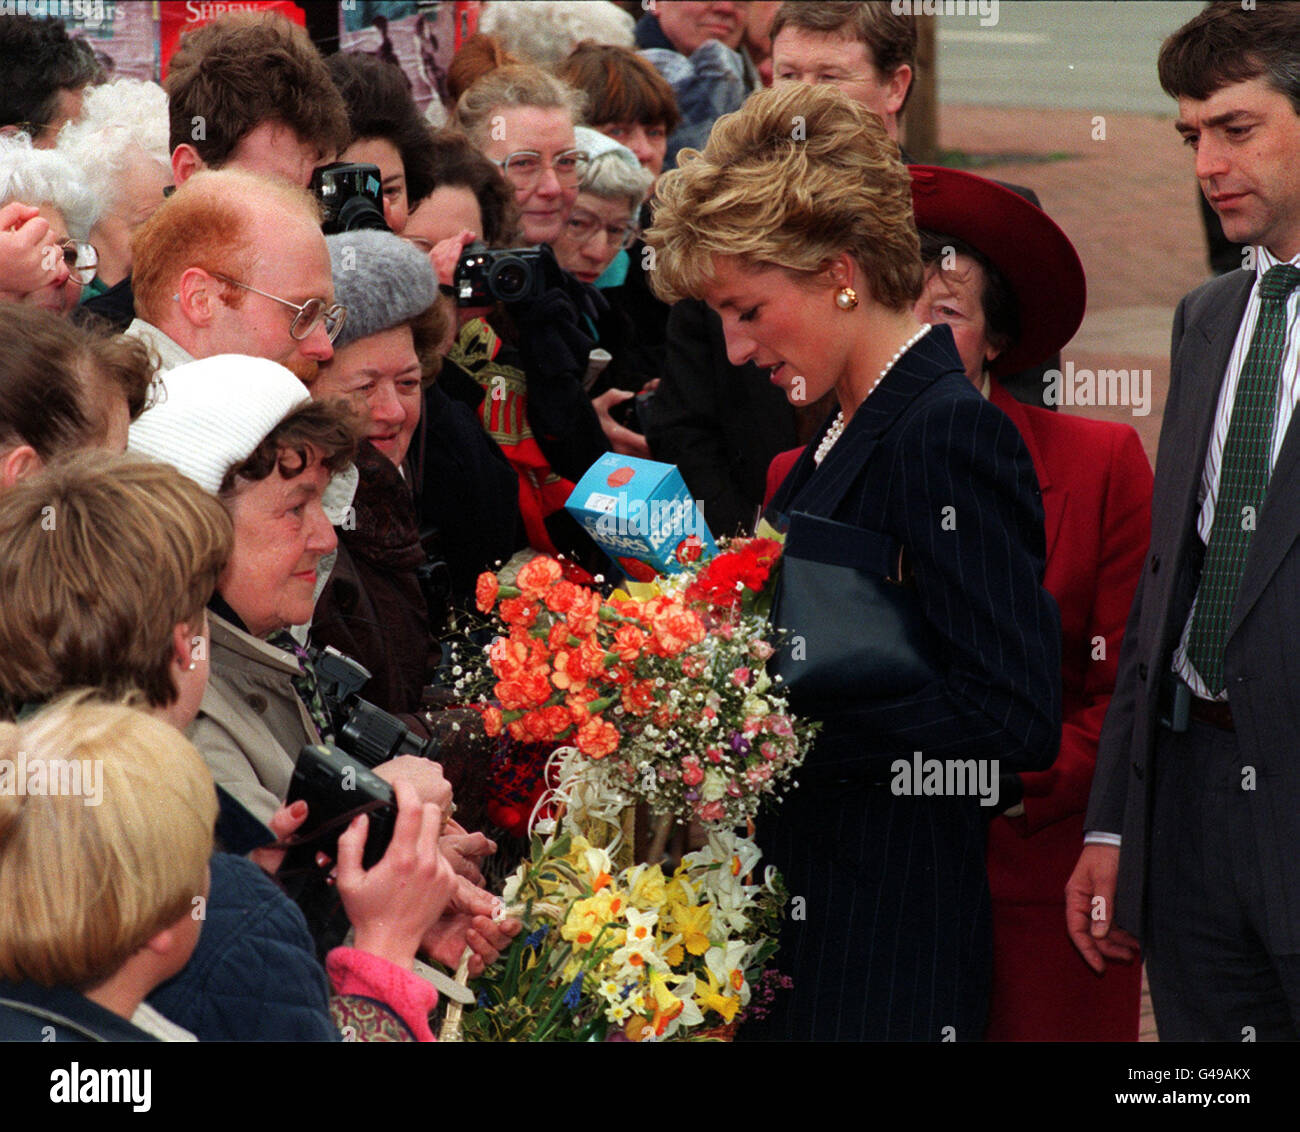 PA NEWS PHOTO 255648-4 : 6/4/93 : THE PRINCESS OF WALES RECEIVES A BOX OF ROSES CHOCOLATES ON HER ARRIVAL AT THE HEALTH OF THE NATION CONFERENCE. PHOTO BY JOHN GILES. Stock Photo